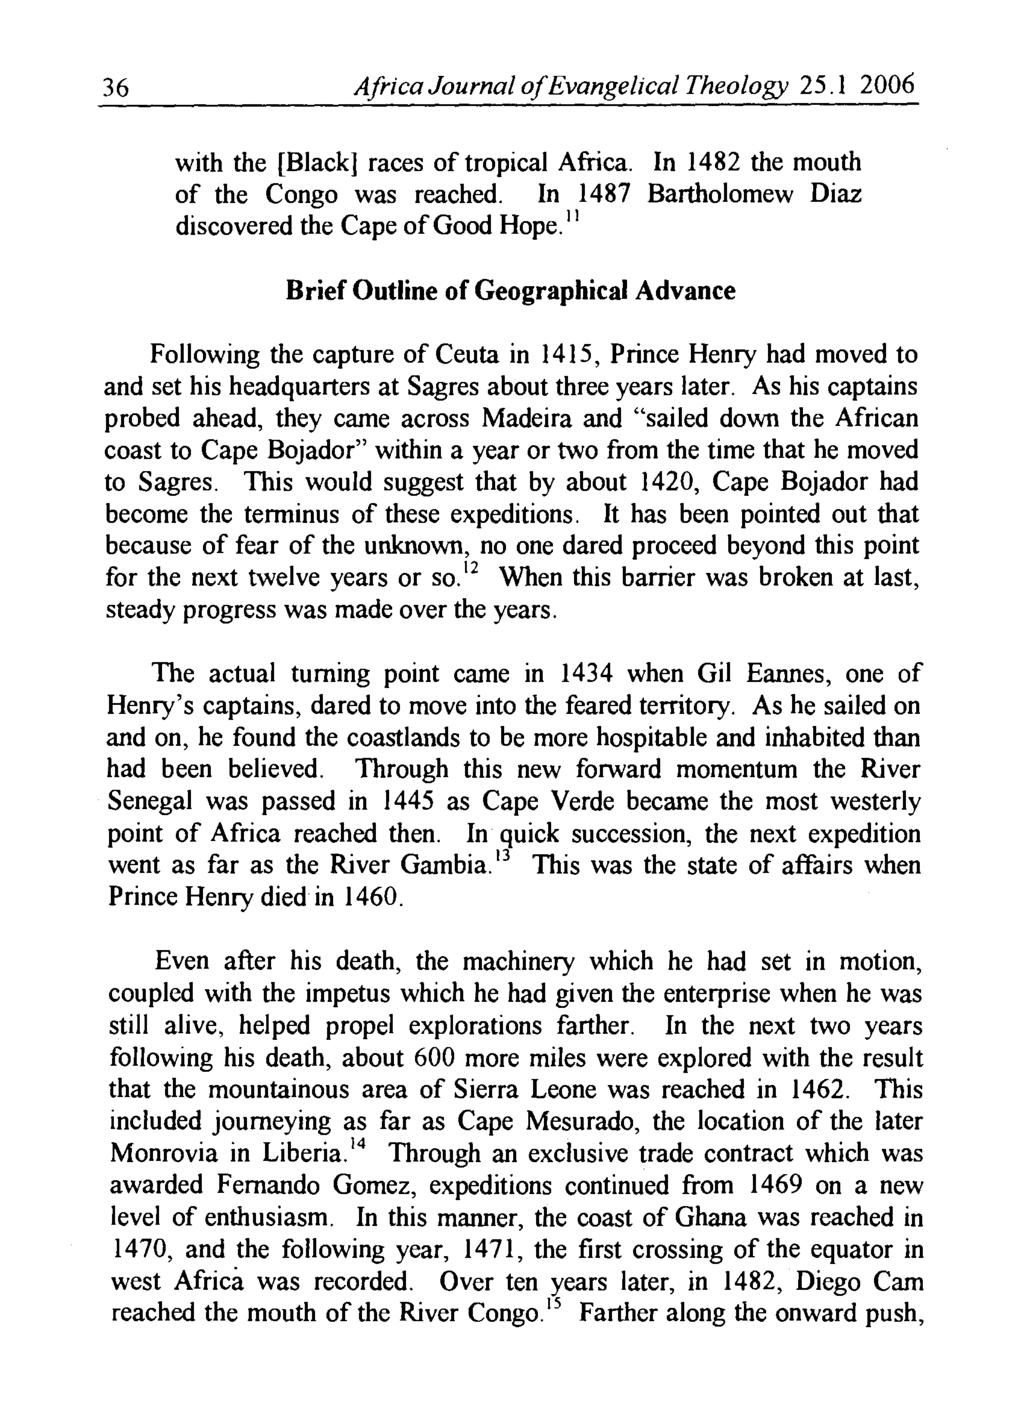 36 Africa Journal of Evangelical Theology 25.1 2006 with the [Black] races of tropical Africa. In 1482 the mouth of the Congo was reached. In 1487 Bartholomew Diaz discovered the Cape of Good Hope.